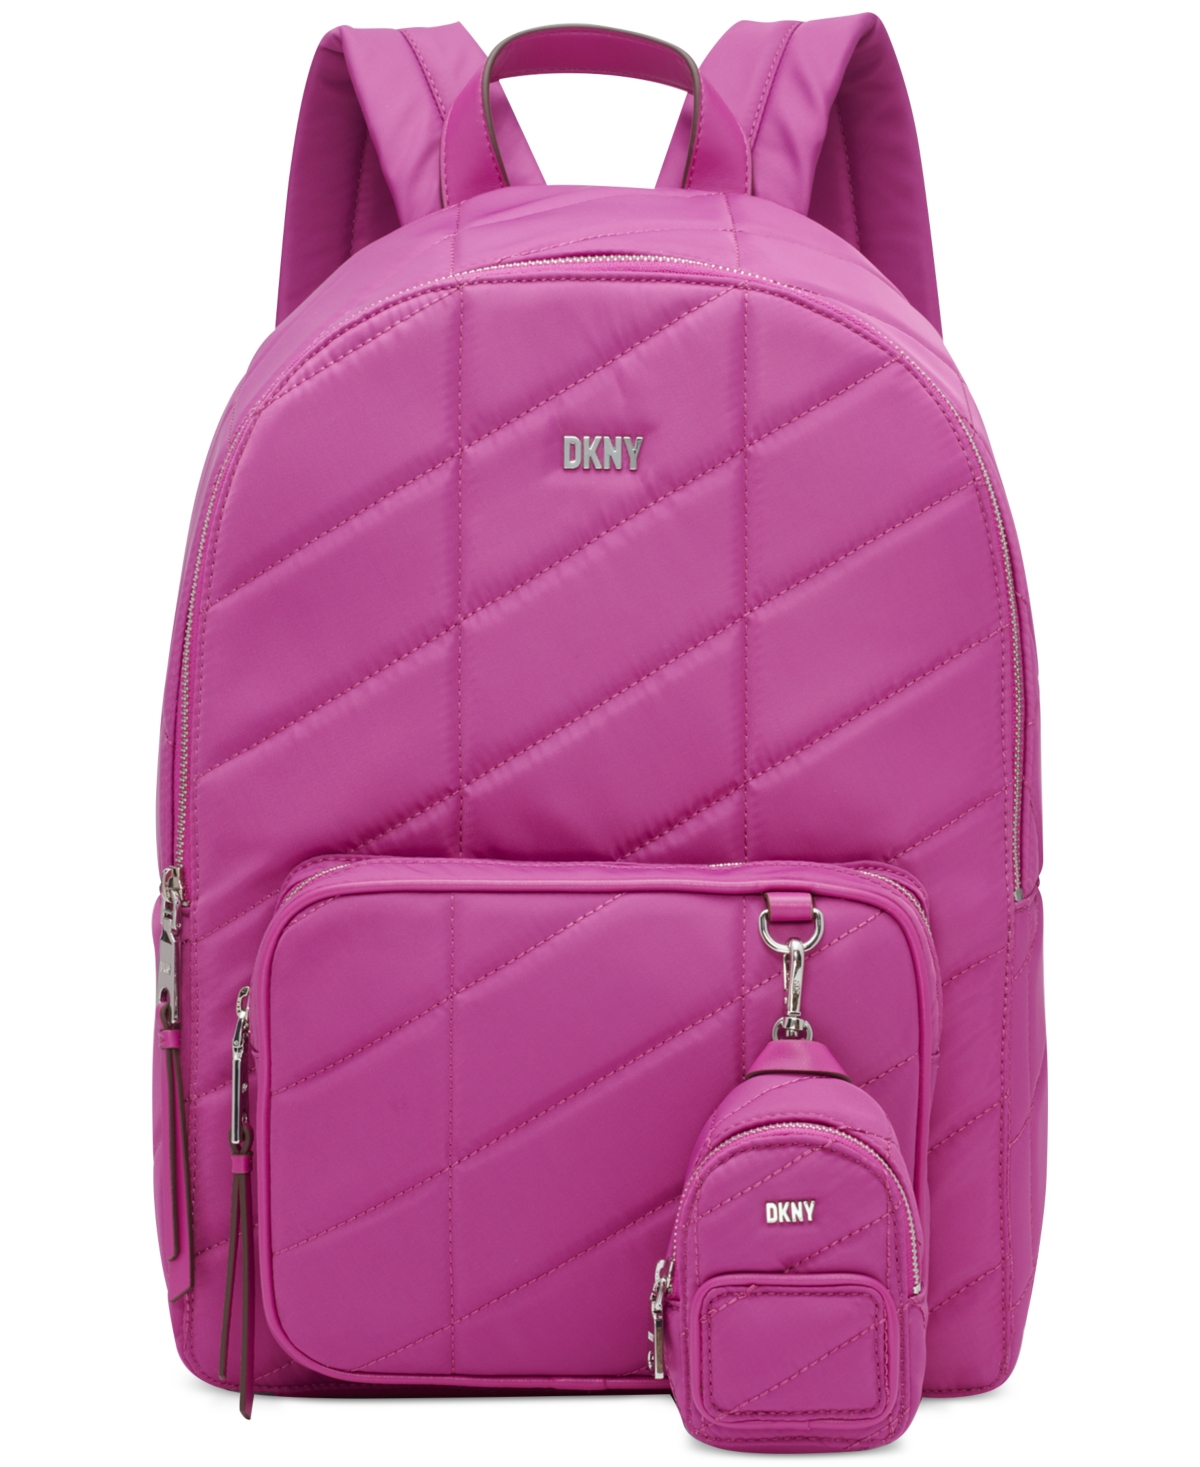 Dkny Bodhi Backpack In Dark Orchid